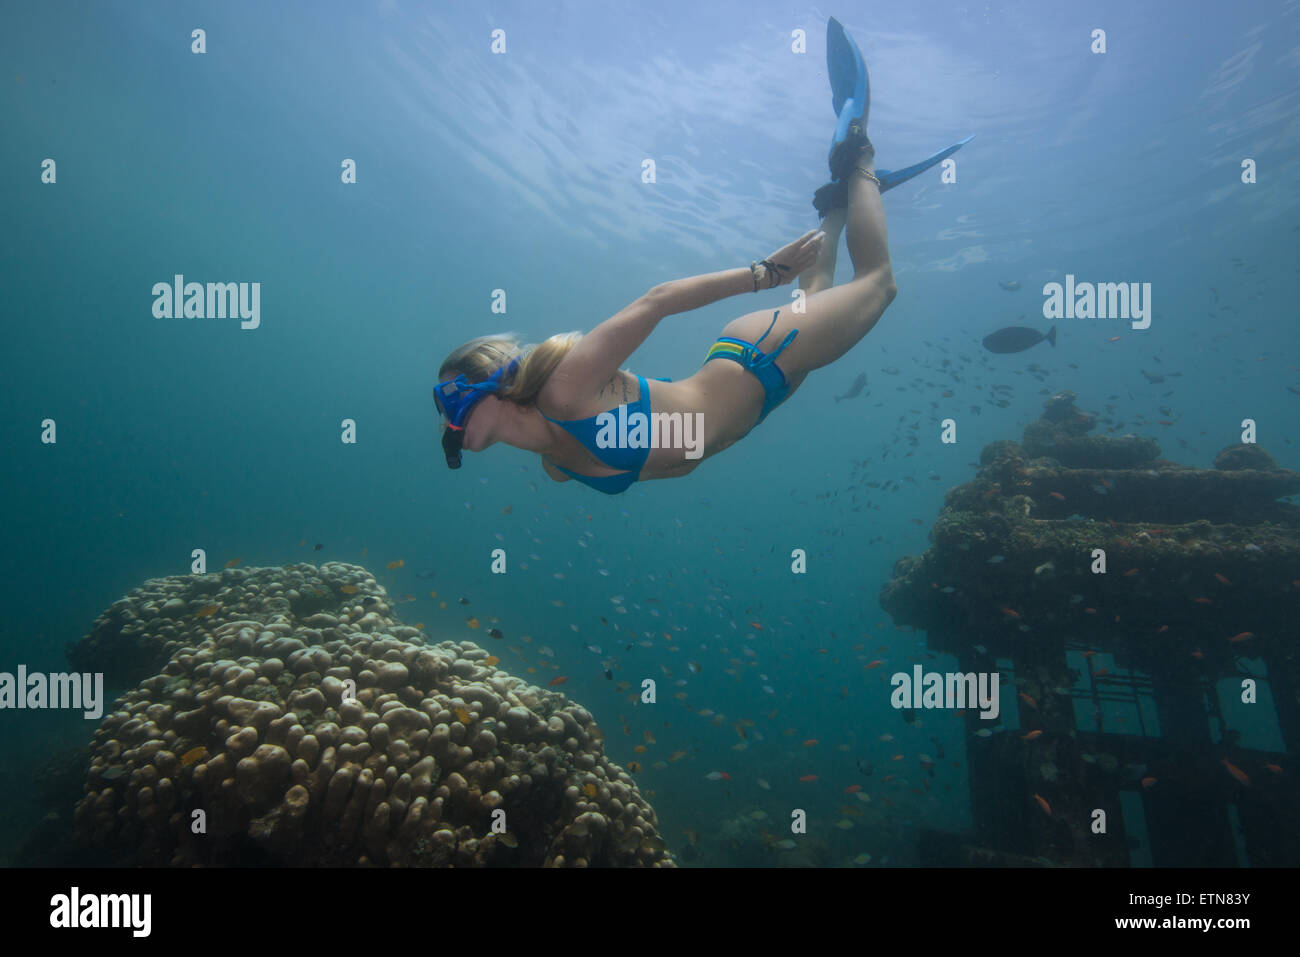 Woman snorkeling and exploring a sunken temple and coral reef, Bali, Indonesia Stock Photo